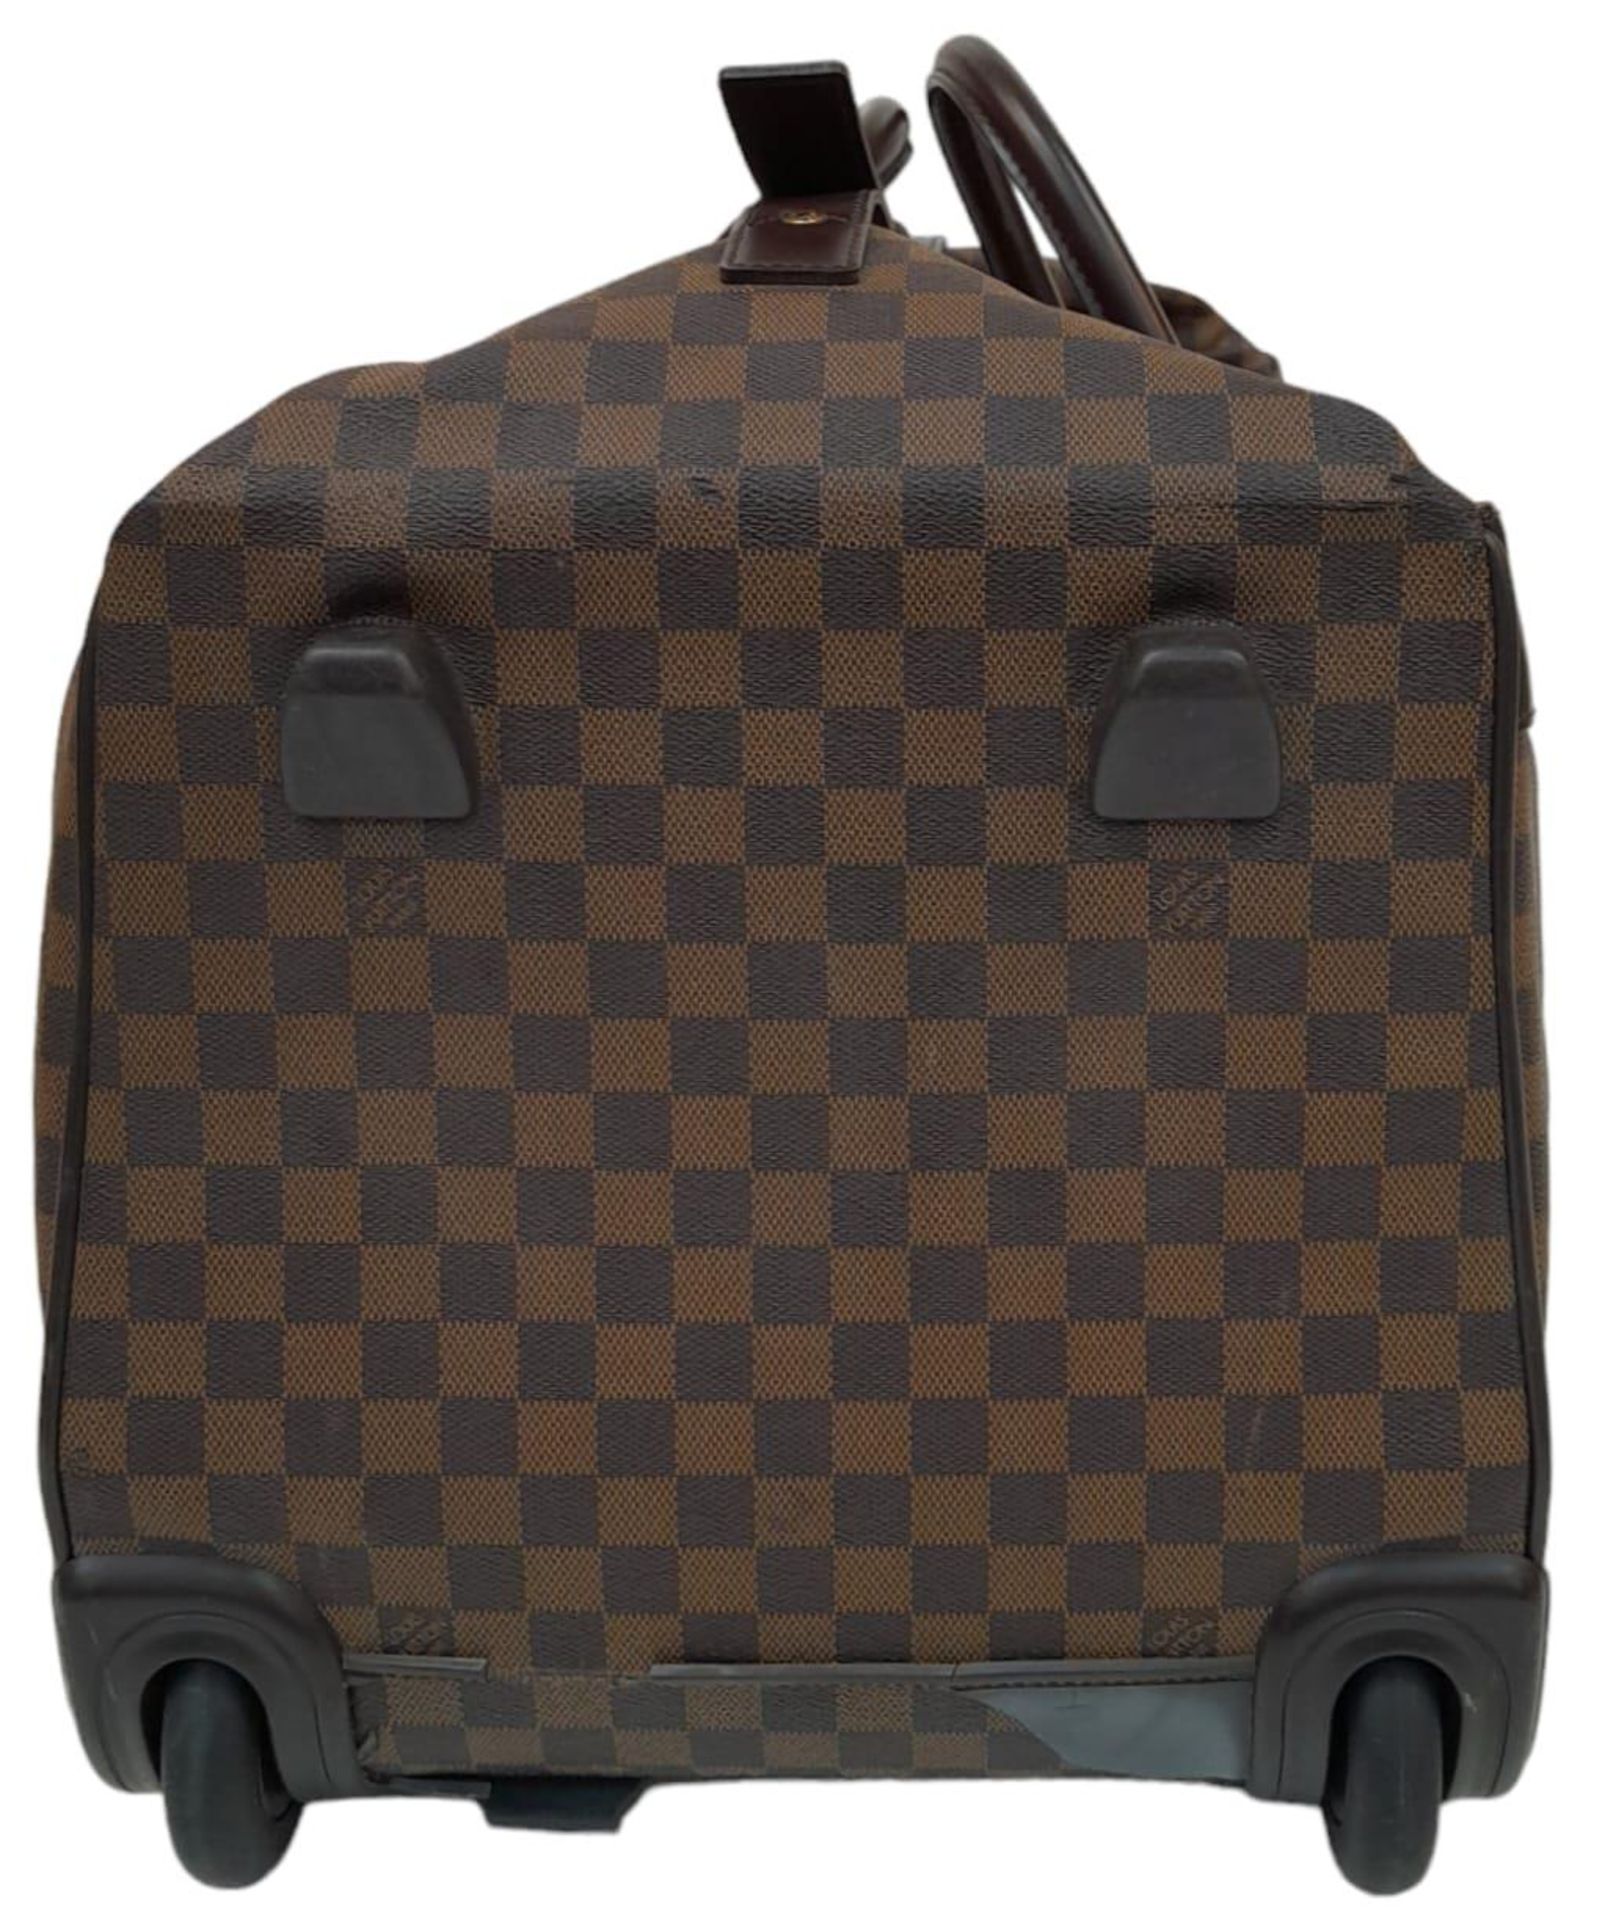 A Louis Vuitton Damier Ebene Eole Convertible Travel Bag. Leather exterior with gold-toned hardware, - Image 3 of 10